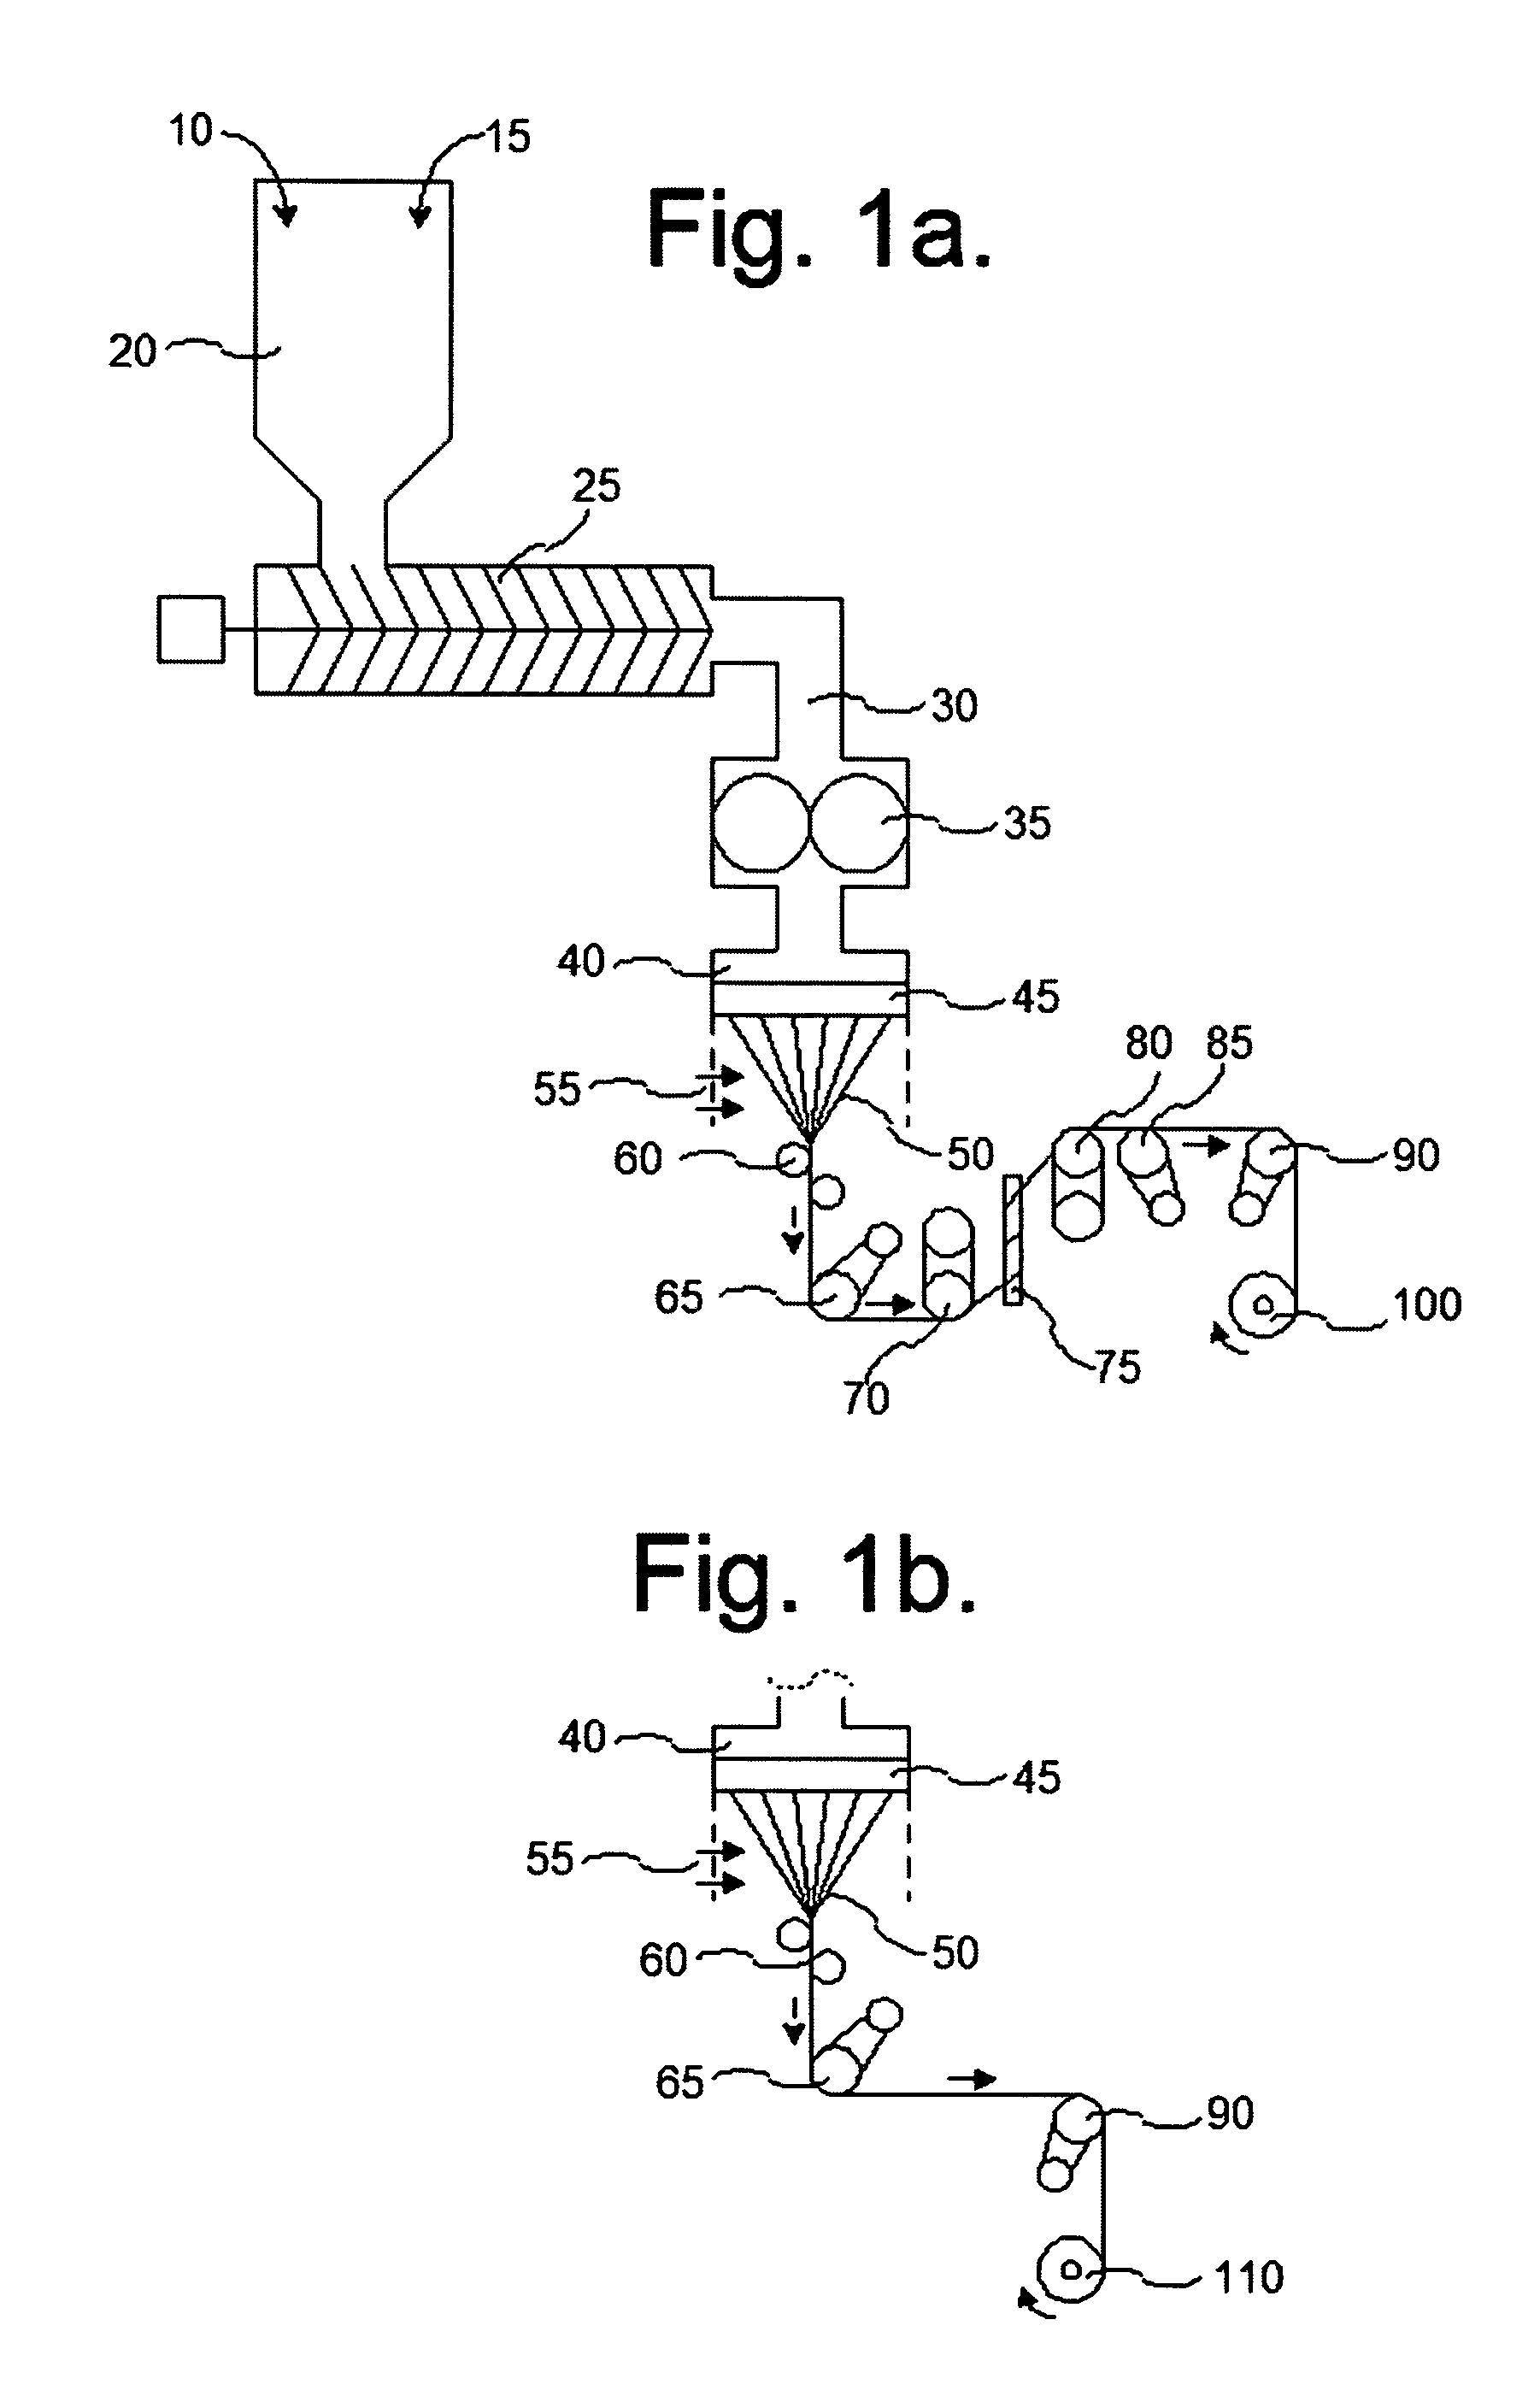 Polymer fibers, fabrics and equipment with a modified near infrared reflectance signature